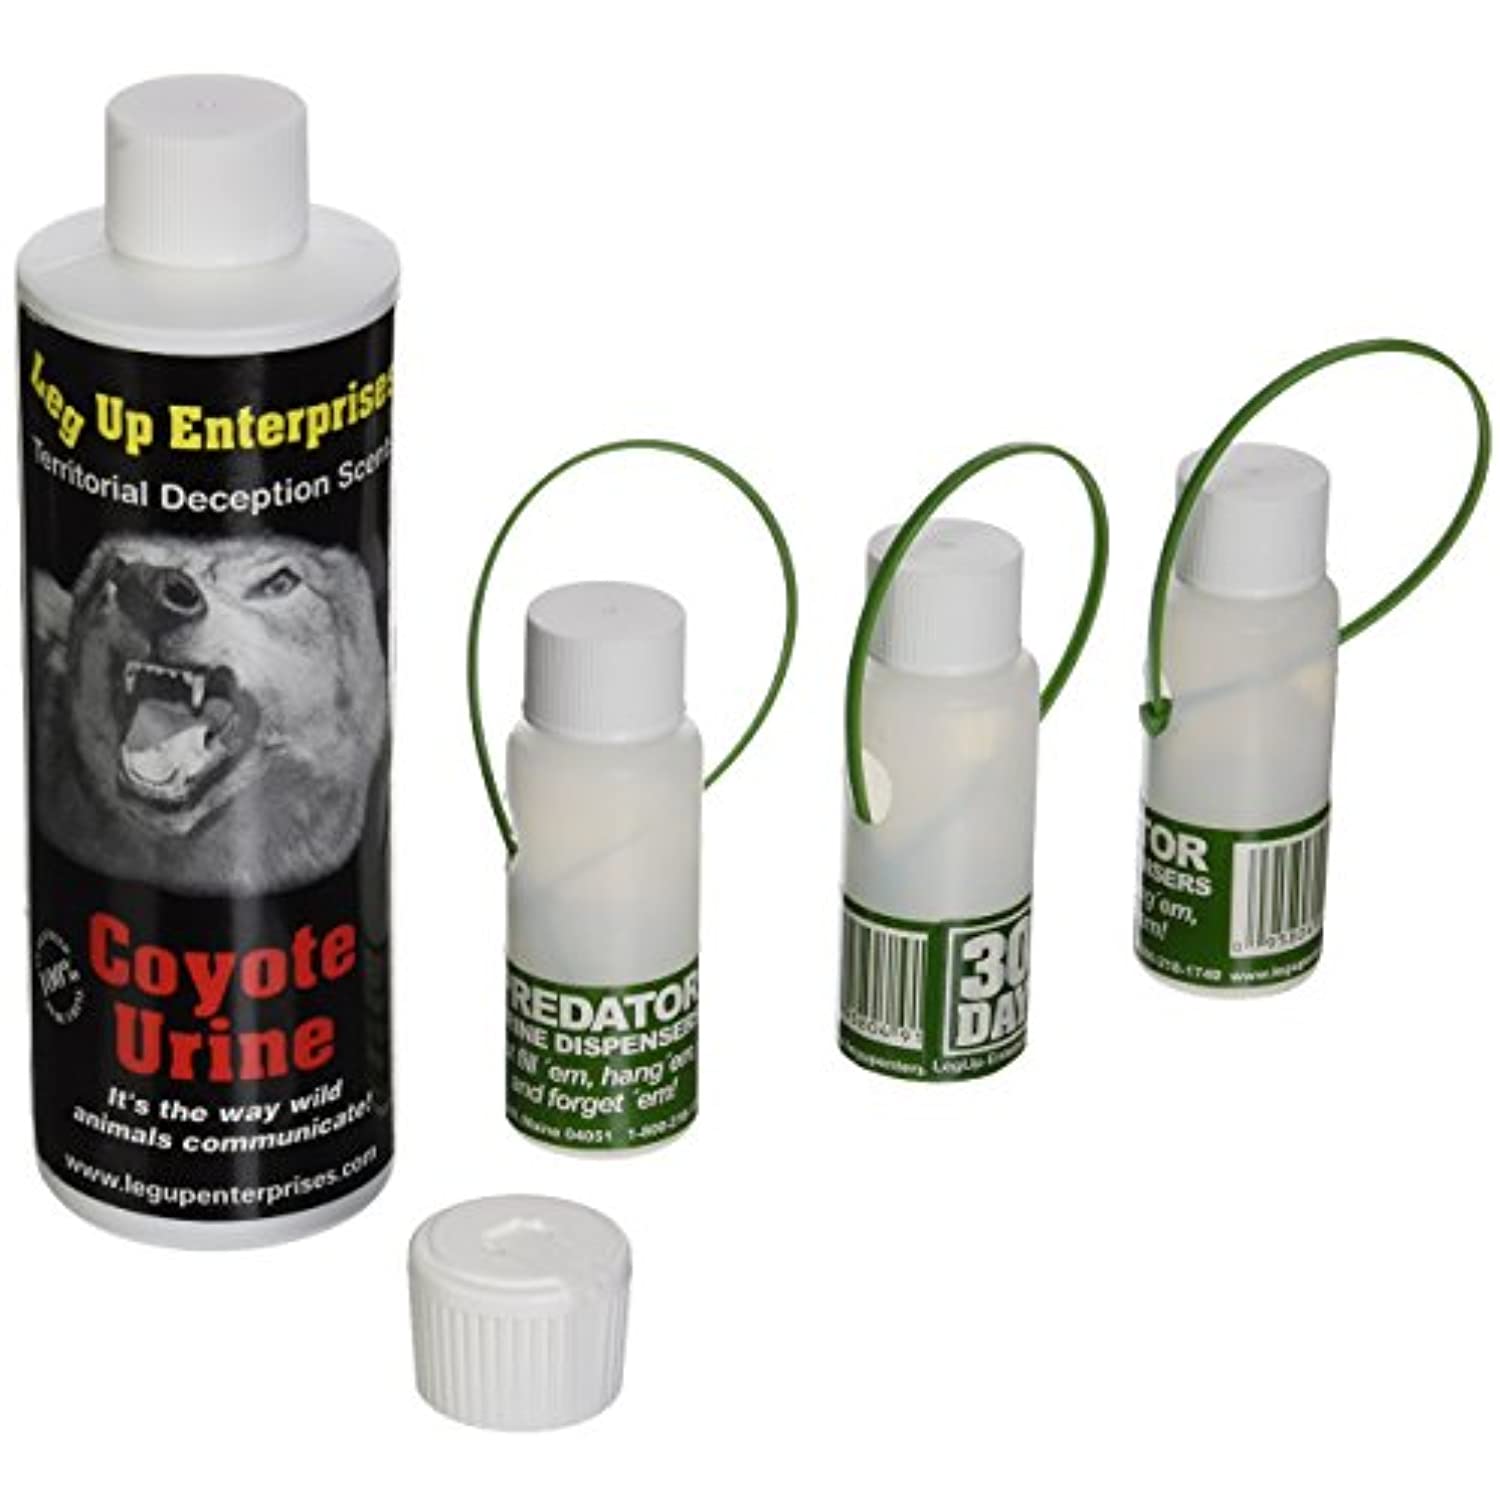 Leg Up Coyote Urine with 3 30 Day Dispensers, 8-Ounce - 91206